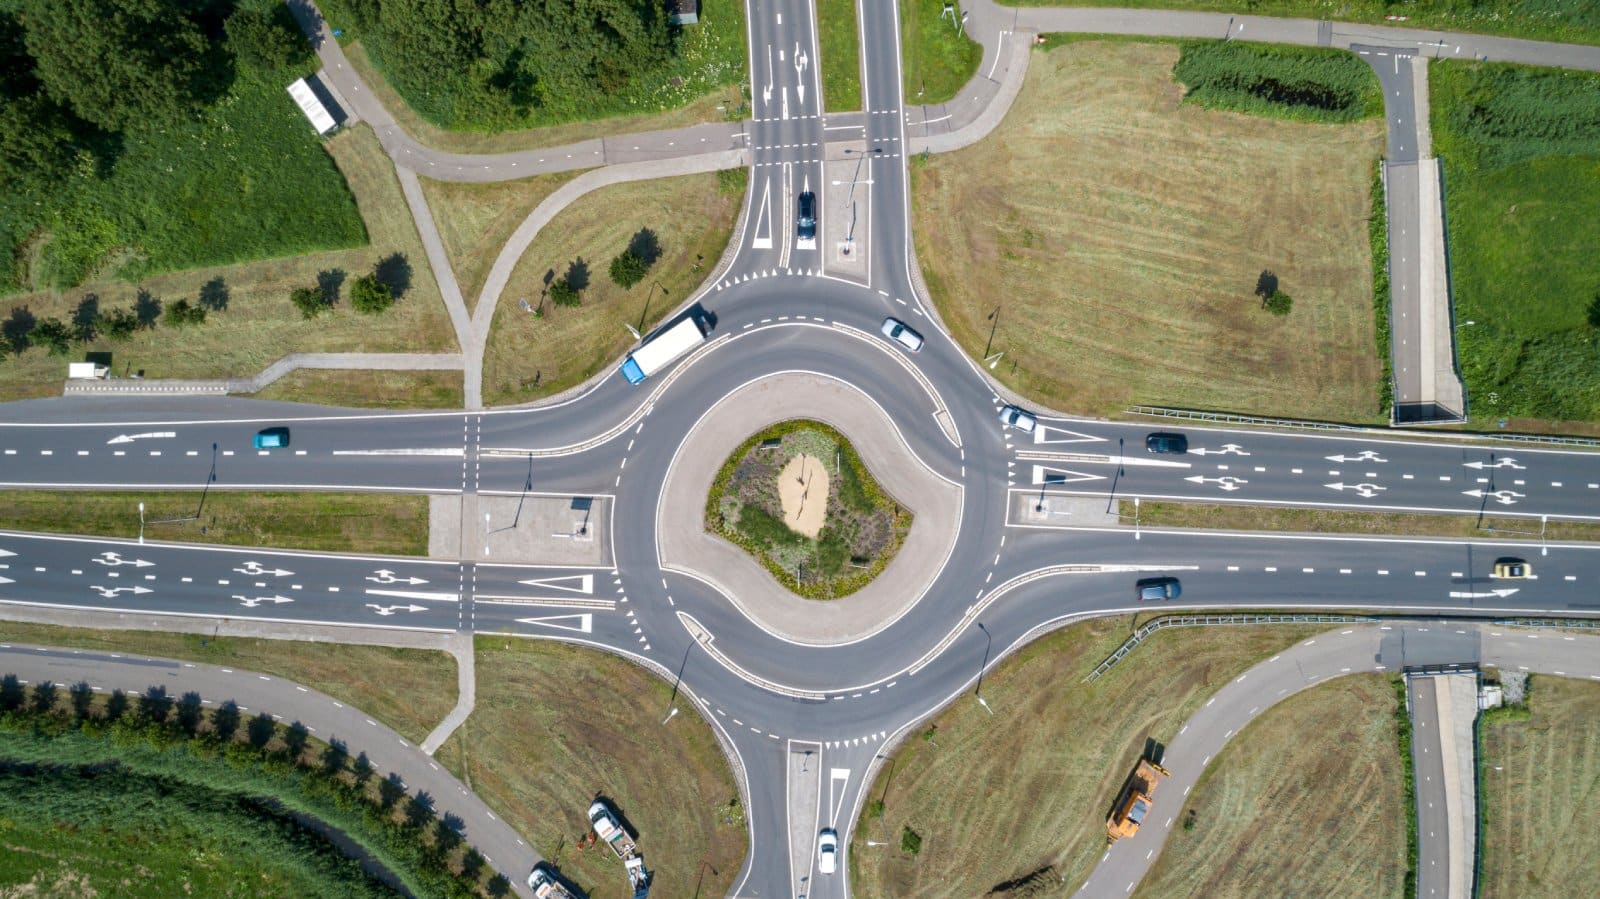 <p class="wp-caption-text">Image Credit: Shutterstock / Tjeerd Kruse</p>  <p><span>Roundabouts are common in places like the UK and France. Remember, those in the roundabout have the right of way, and in left-driving countries, navigate them clockwise.</span></p>